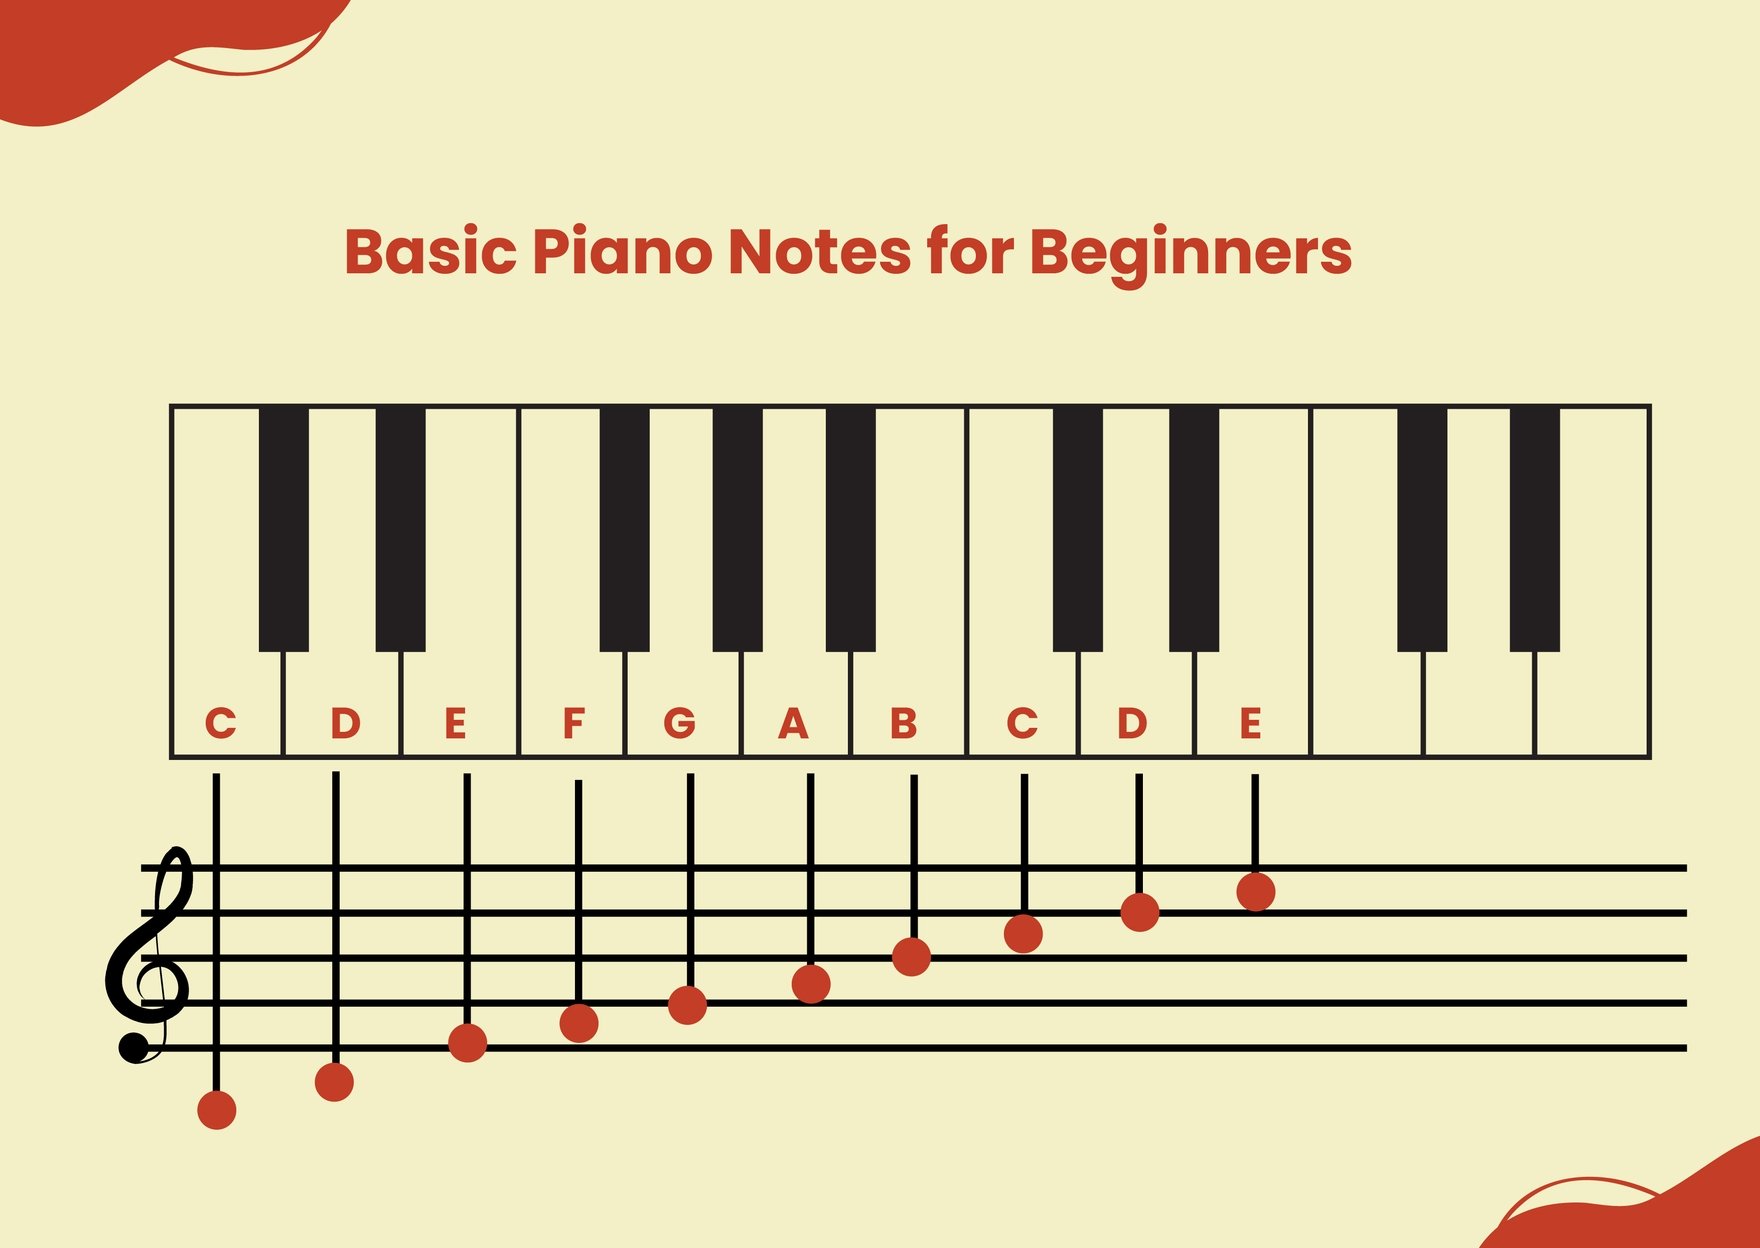 Piano Note Chart For Beginners in PDF, Illustrator